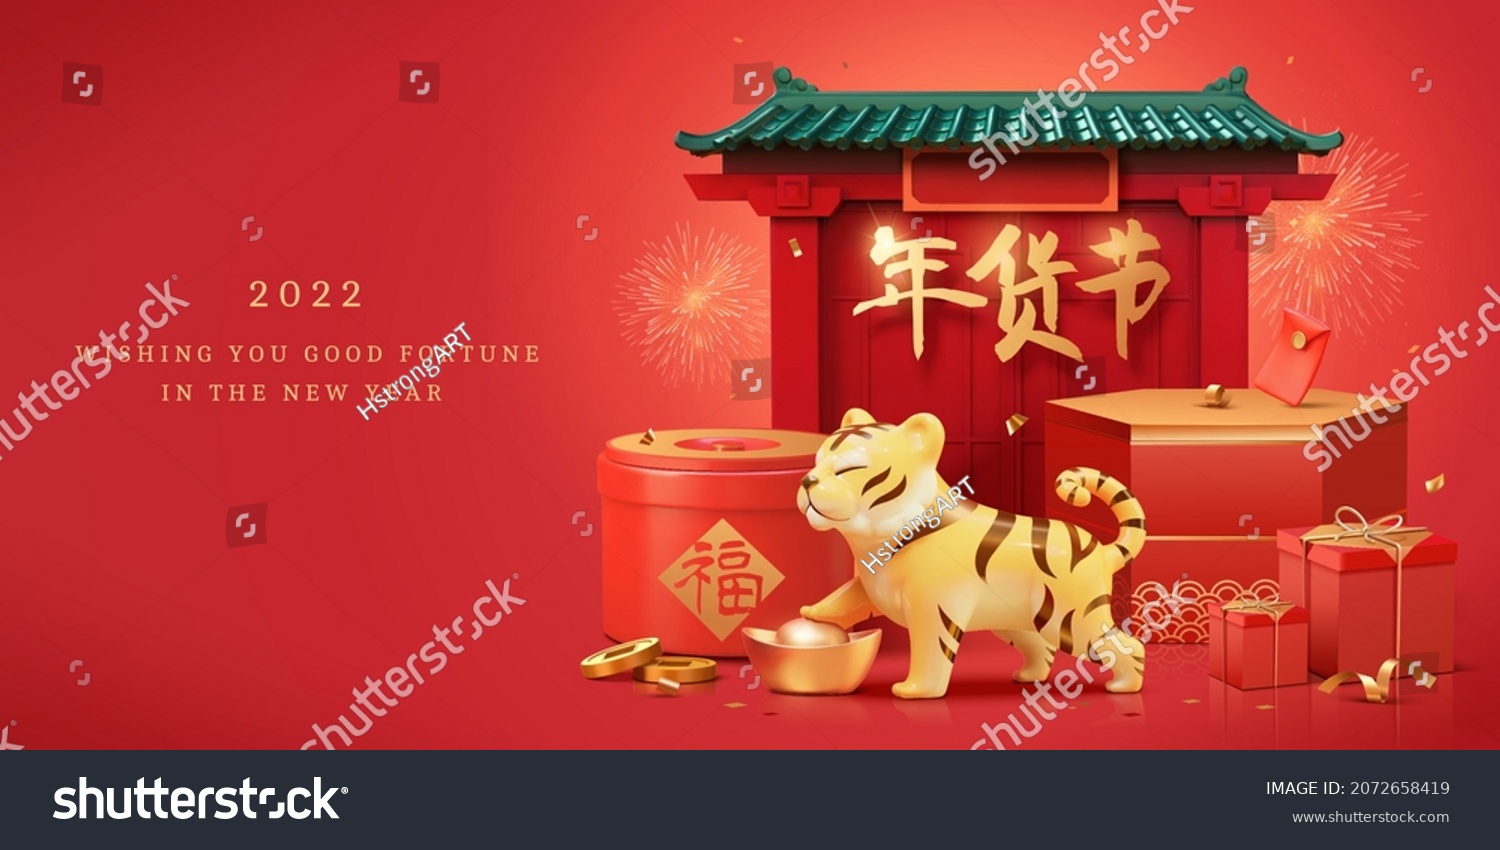 2022 Chinese new year zodiac banner template. 3d composition of temple gate, gift boxes, cute tiger toy and gold coins. Text: CNY shopping #2072658419